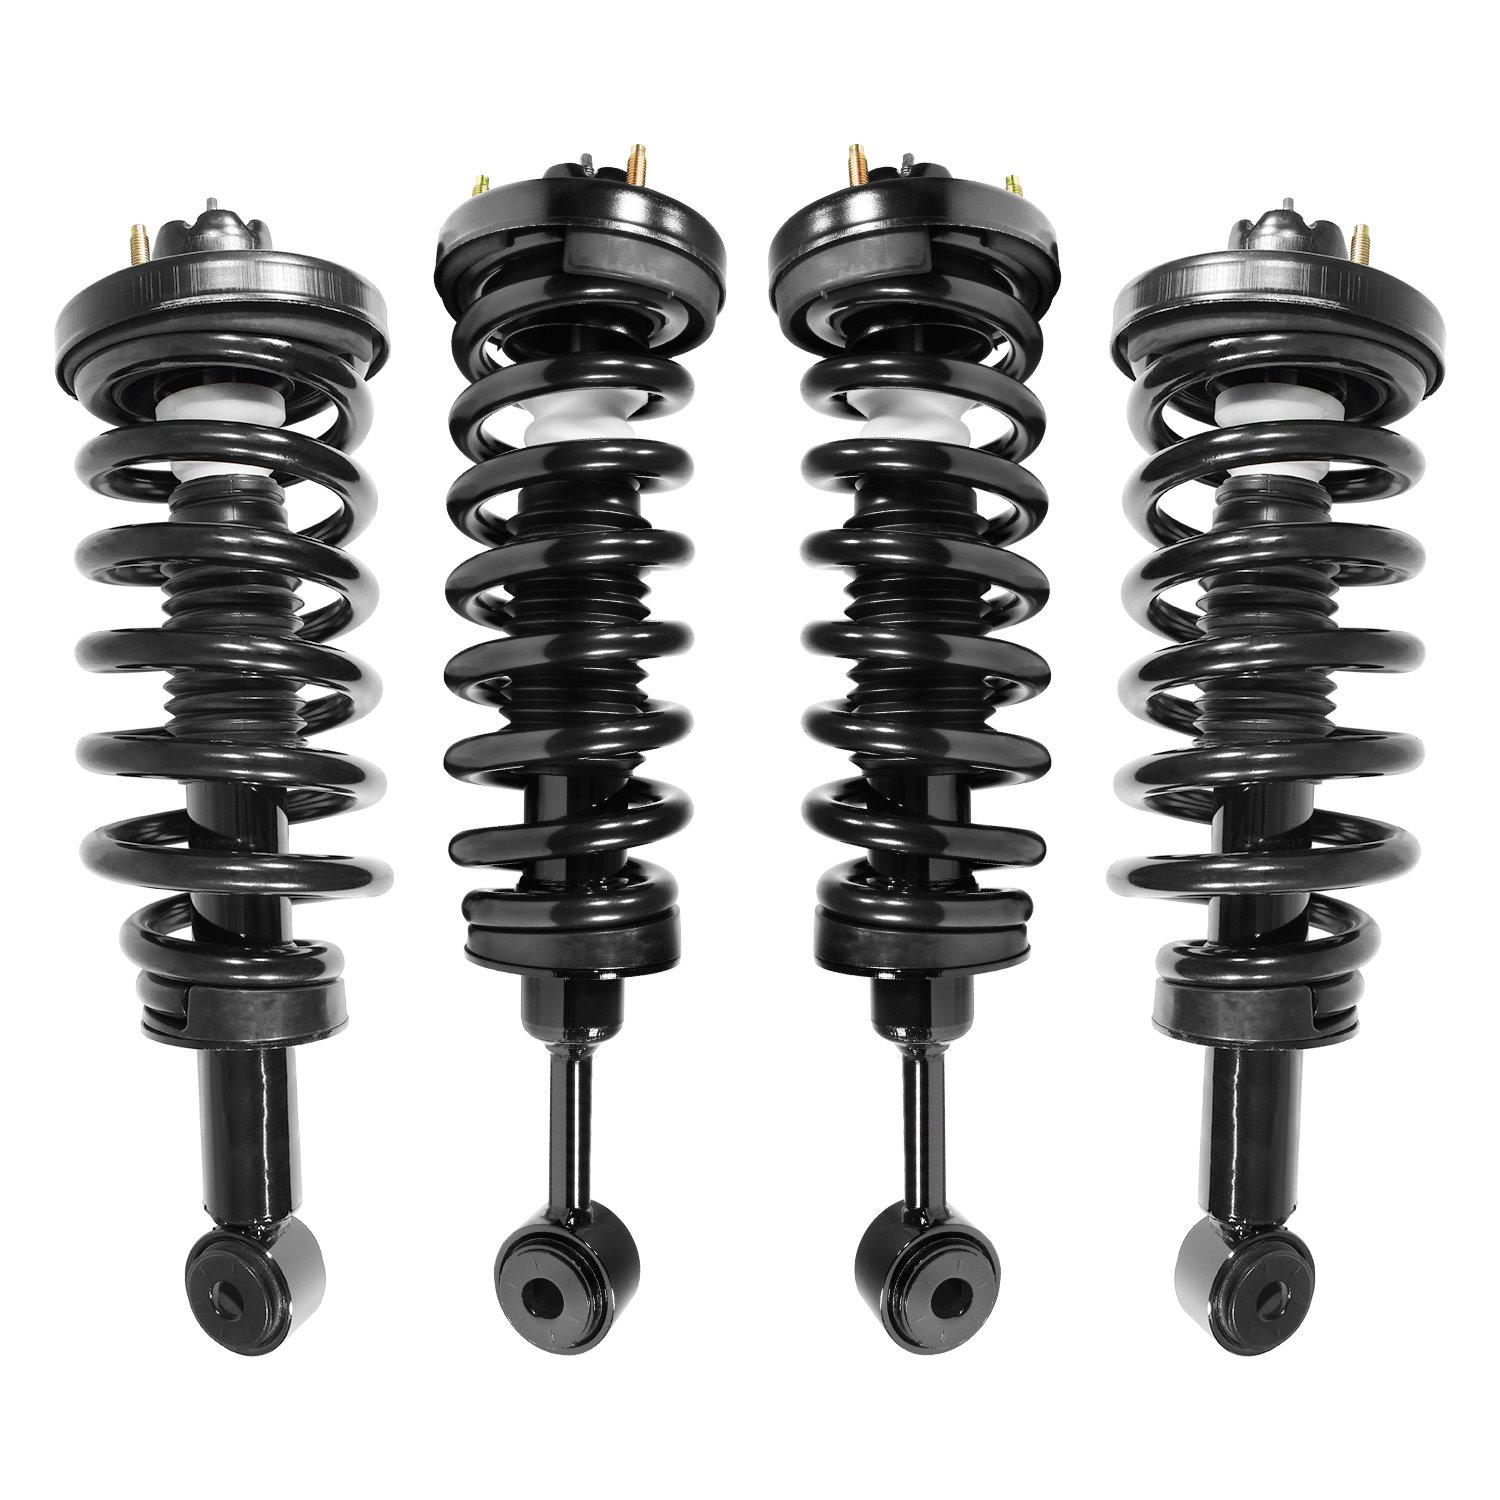 4-11380-15080-001 Front & Rear Suspension Strut & Coil Spring Assembly Kit Fits Select Ford Expedition, Lincoln Navigator